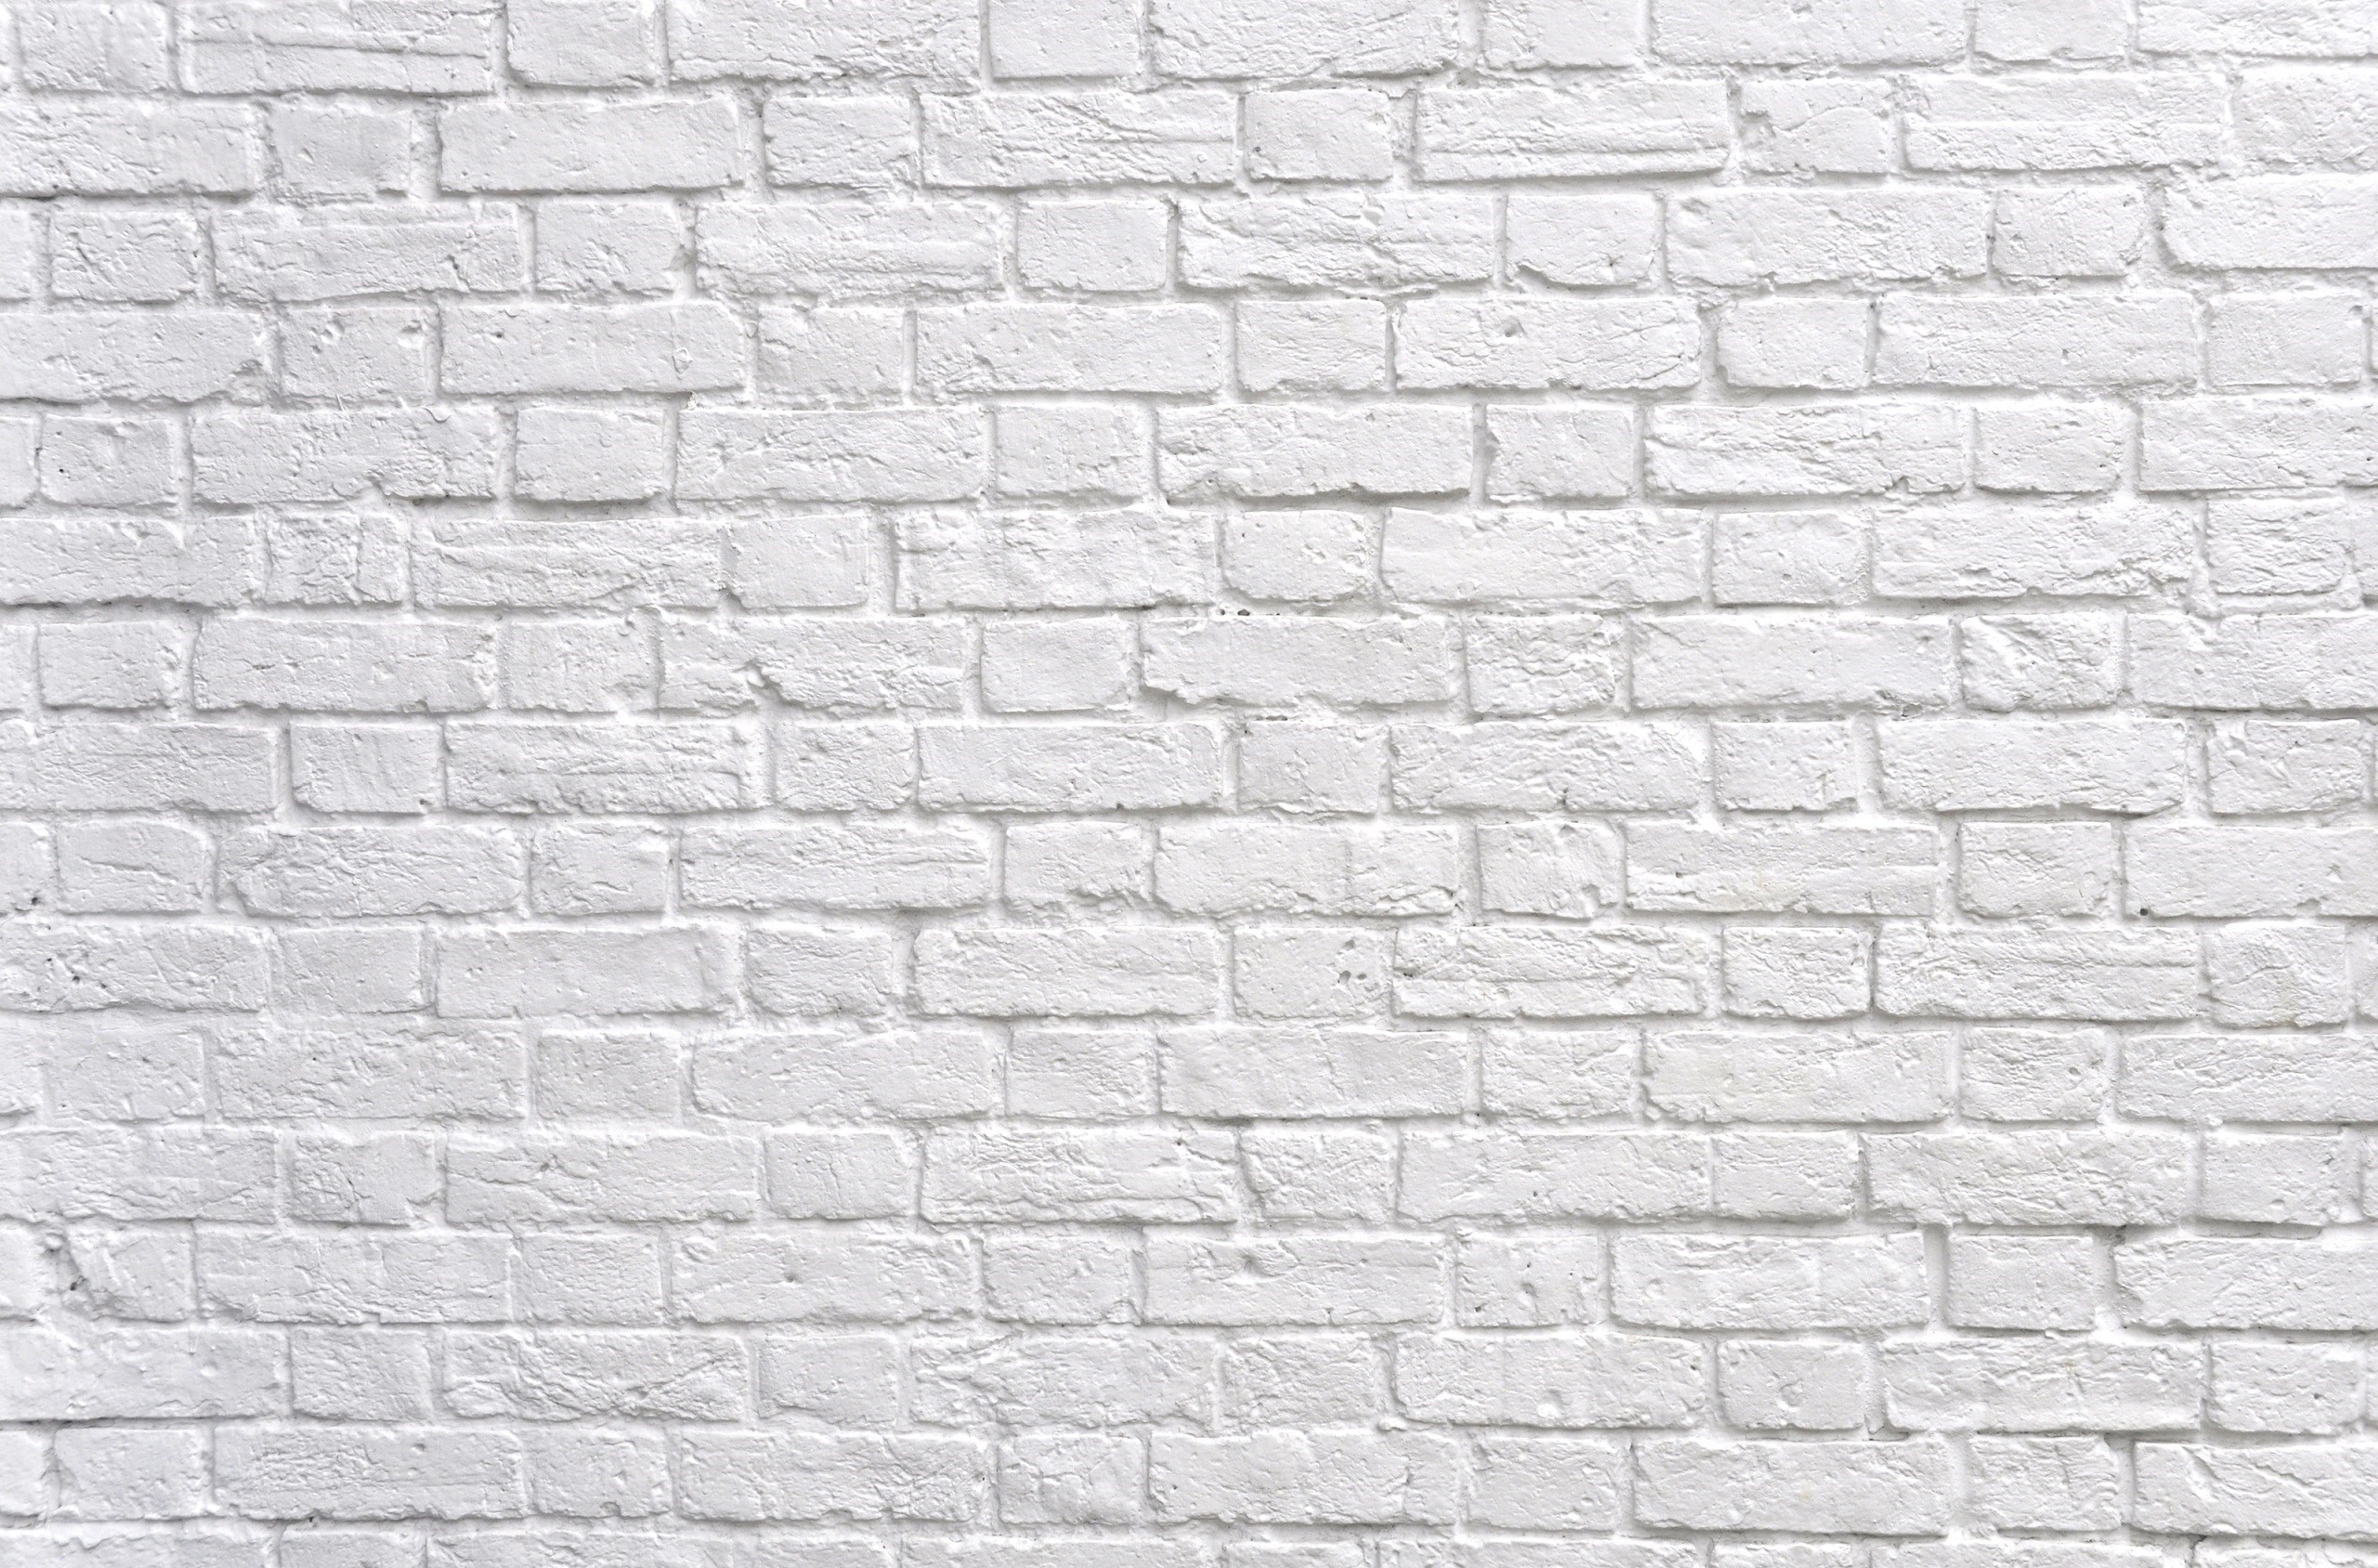 Black And White Brick Wall Background White Brick Wall Image Decoration Picture White Brick Wall Nugent